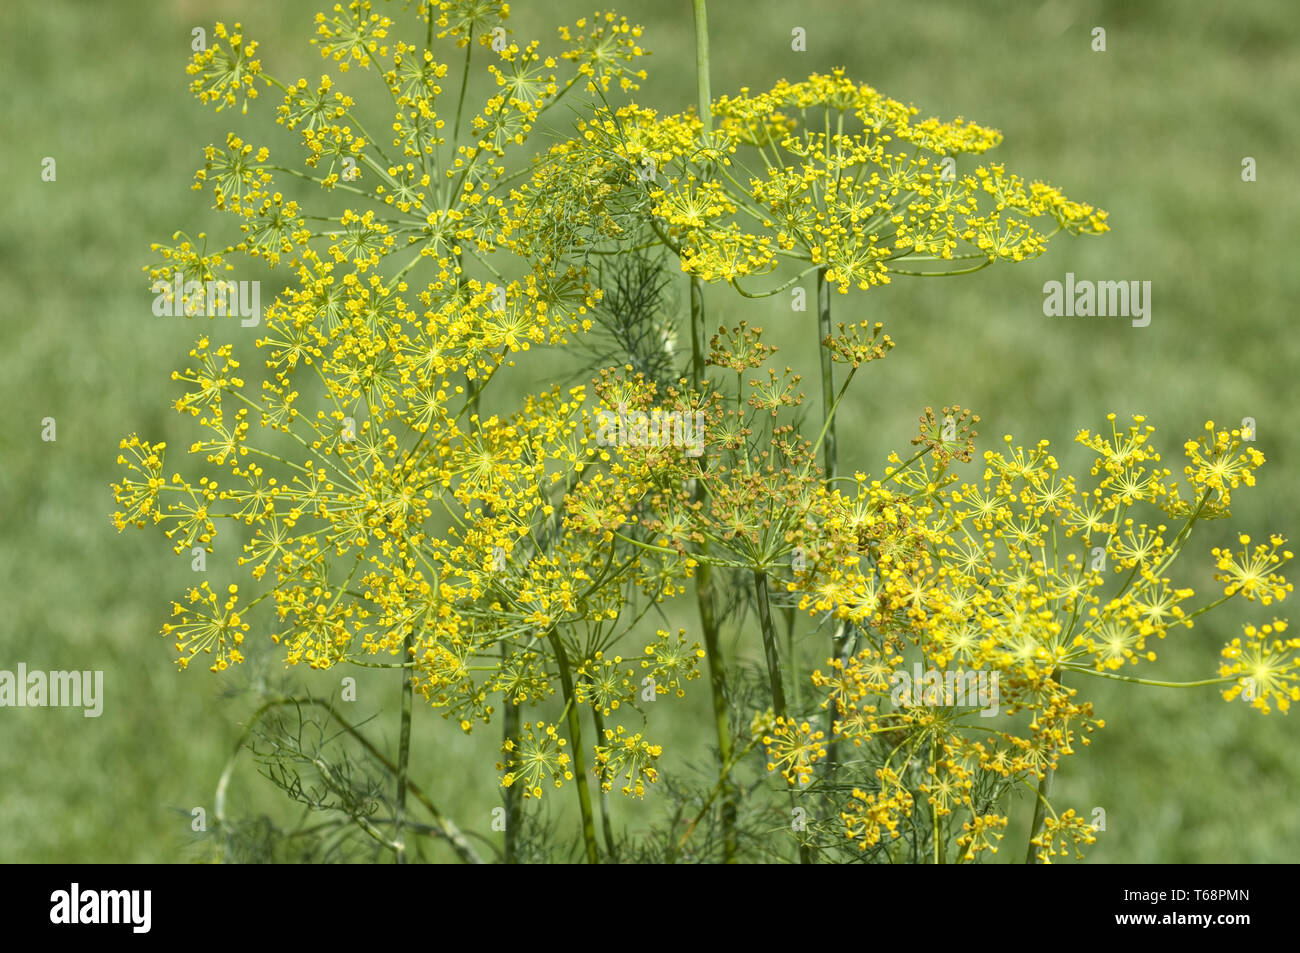 Dill, Anethum graveolens, annual herb Stock Photo